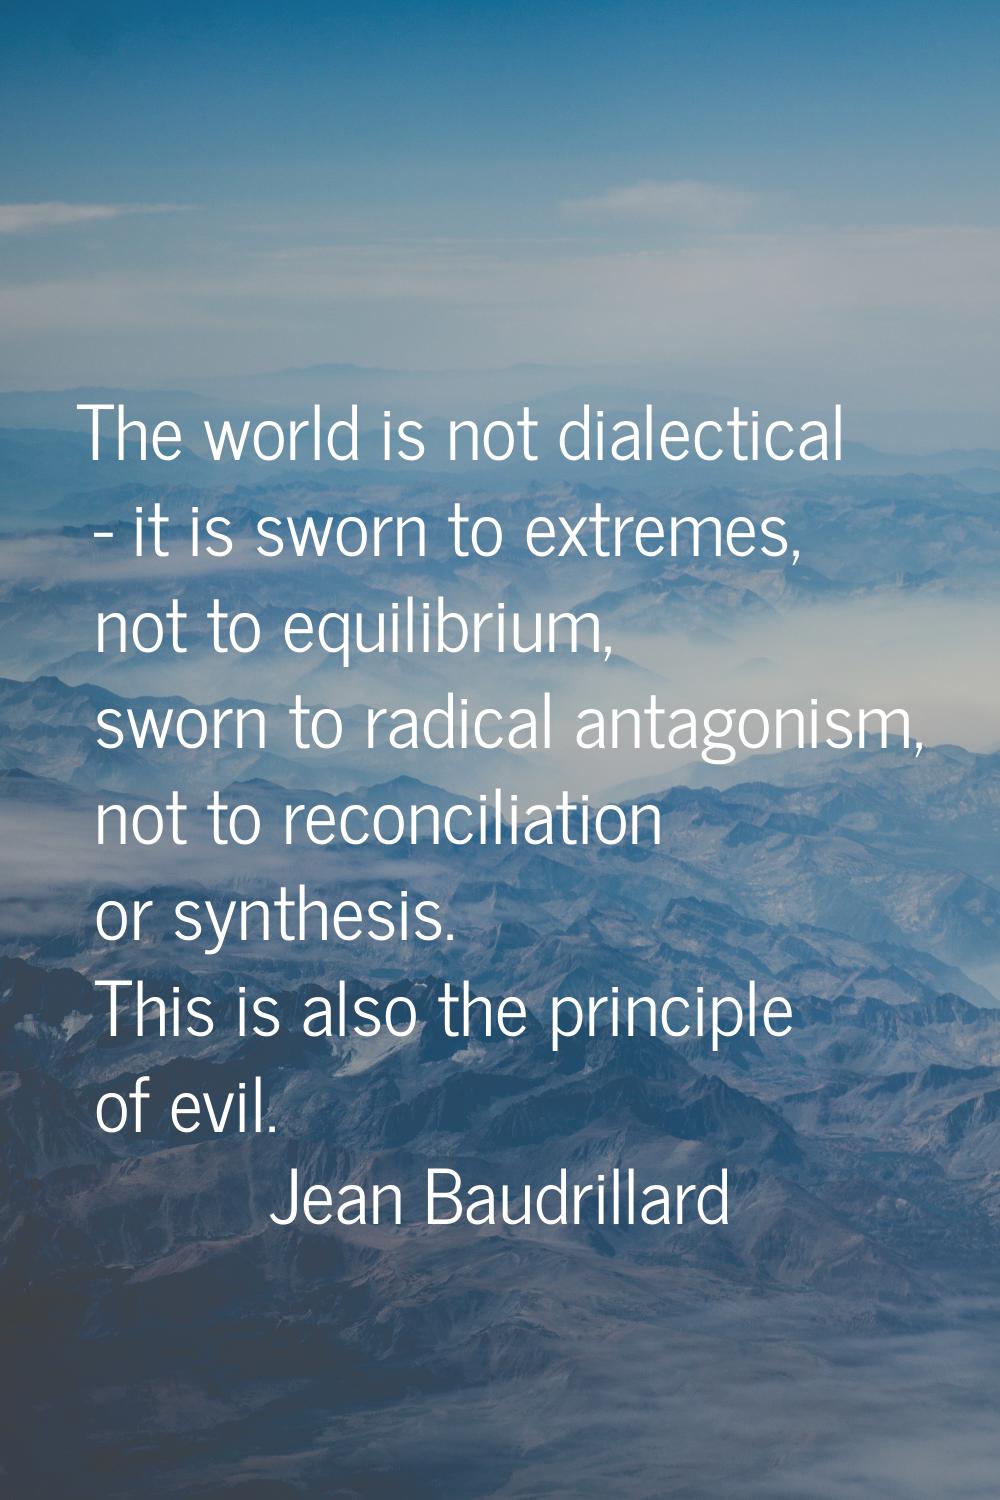 The world is not dialectical - it is sworn to extremes, not to equilibrium, sworn to radical antago